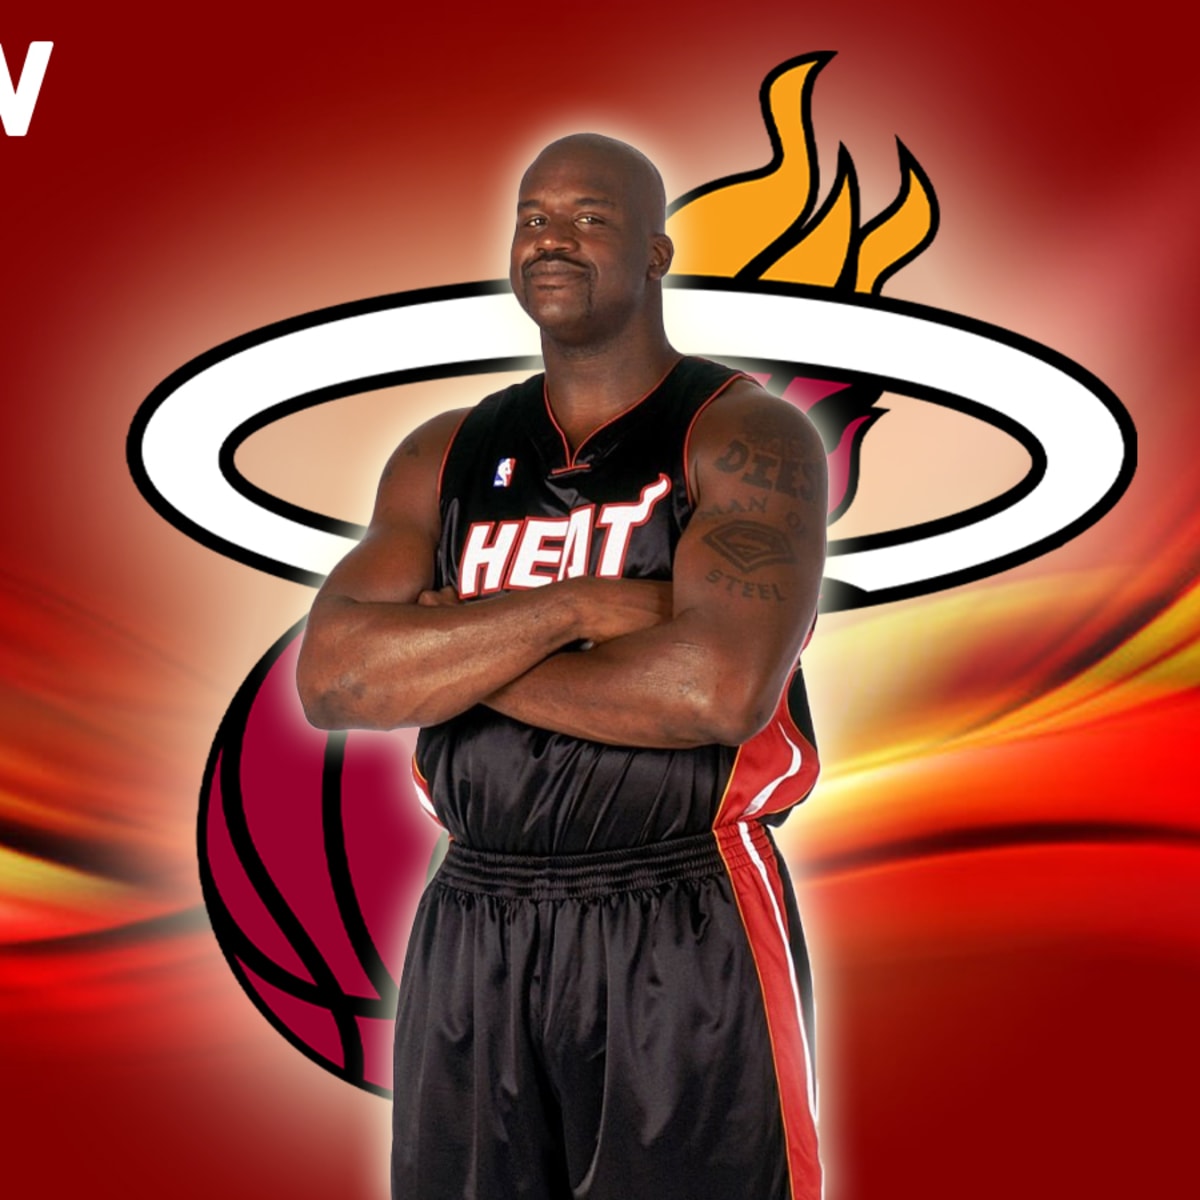 A Look At The Miami Heat `City Edition' Jerseys For This Year - Sports  Illustrated Miami Heat News, Analysis and More